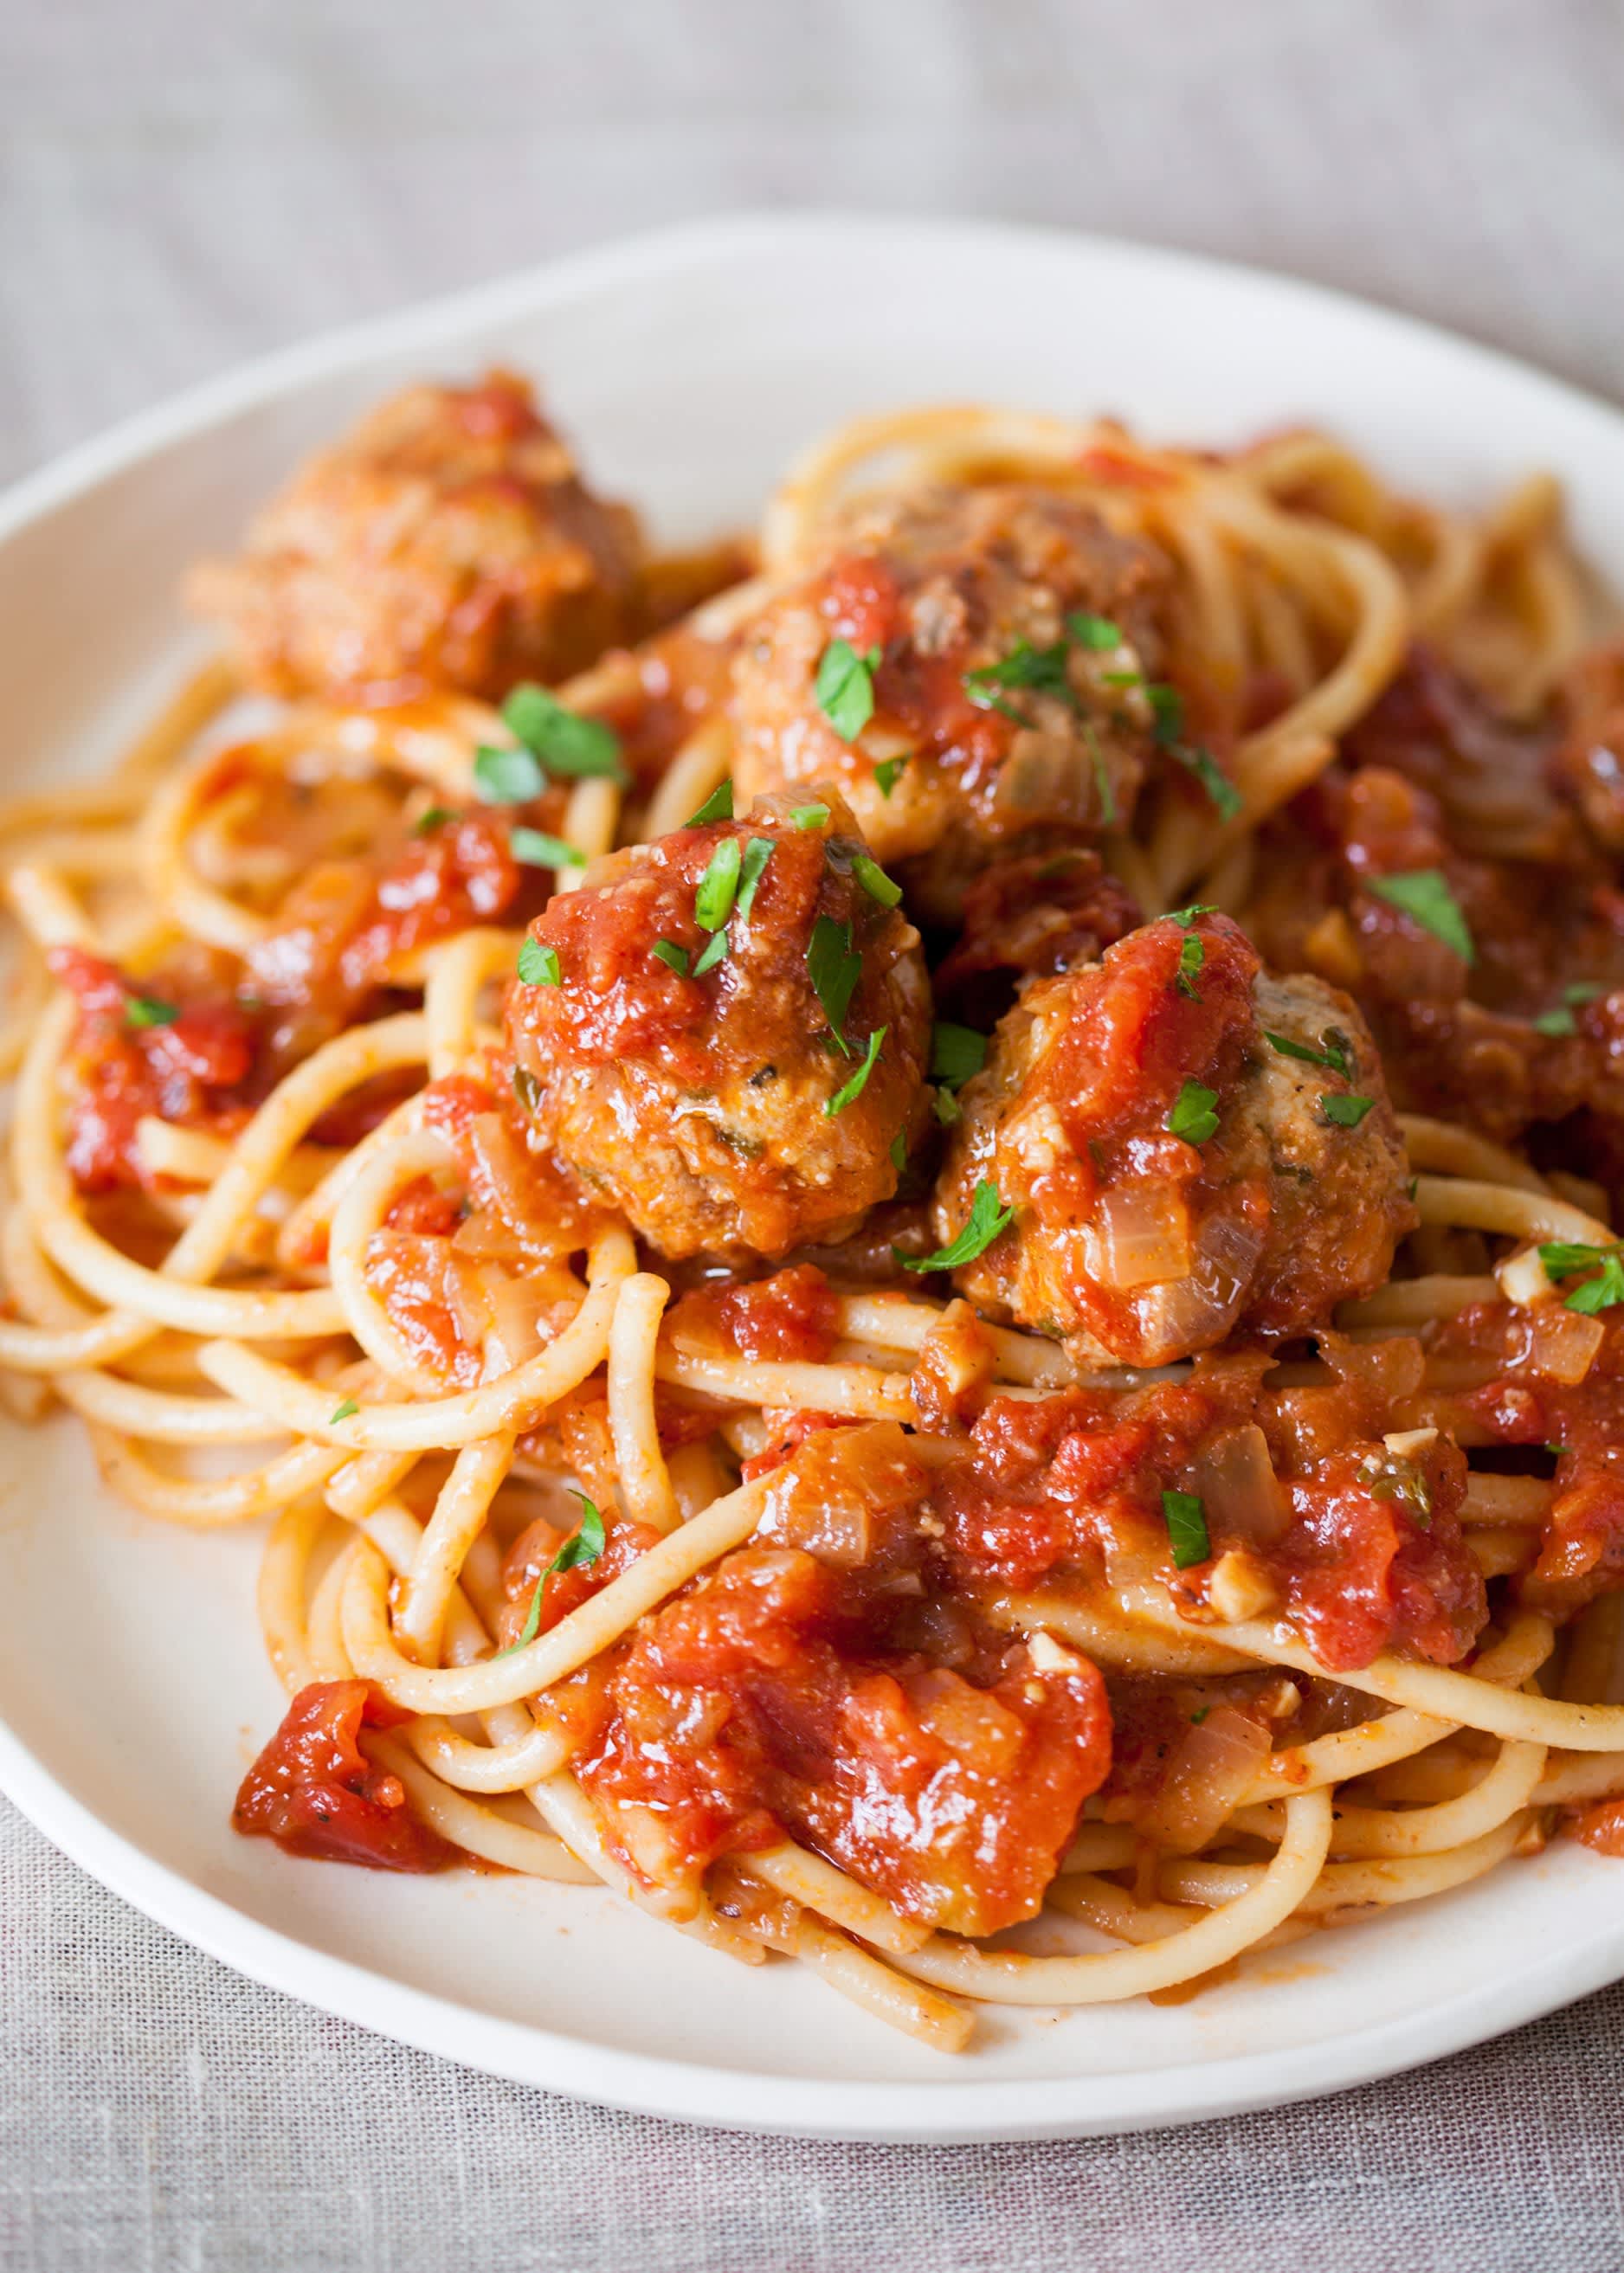 How To Make Meatballs The Easiest, Simplest Method Kitchn